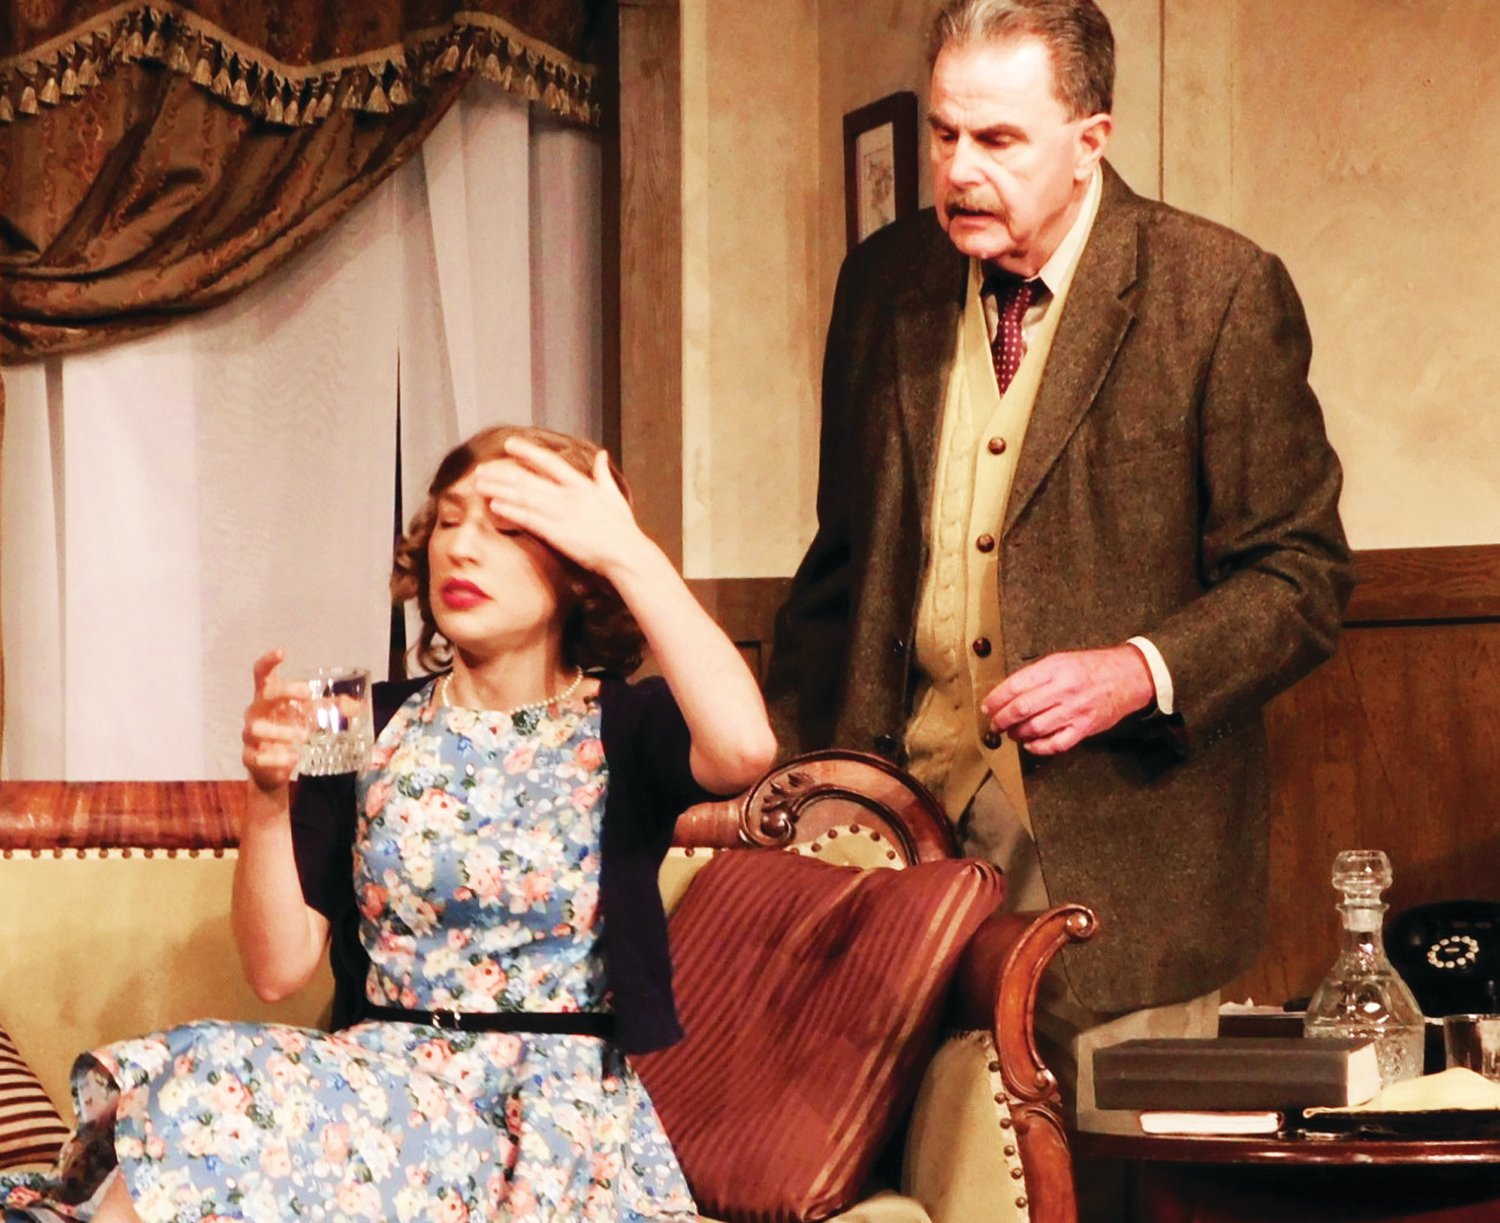 Charlotte Kirkby and Ed Patton in the Actors’ Net production of “Spider’s Web” by Agatha Christie, running through Feb. 16.